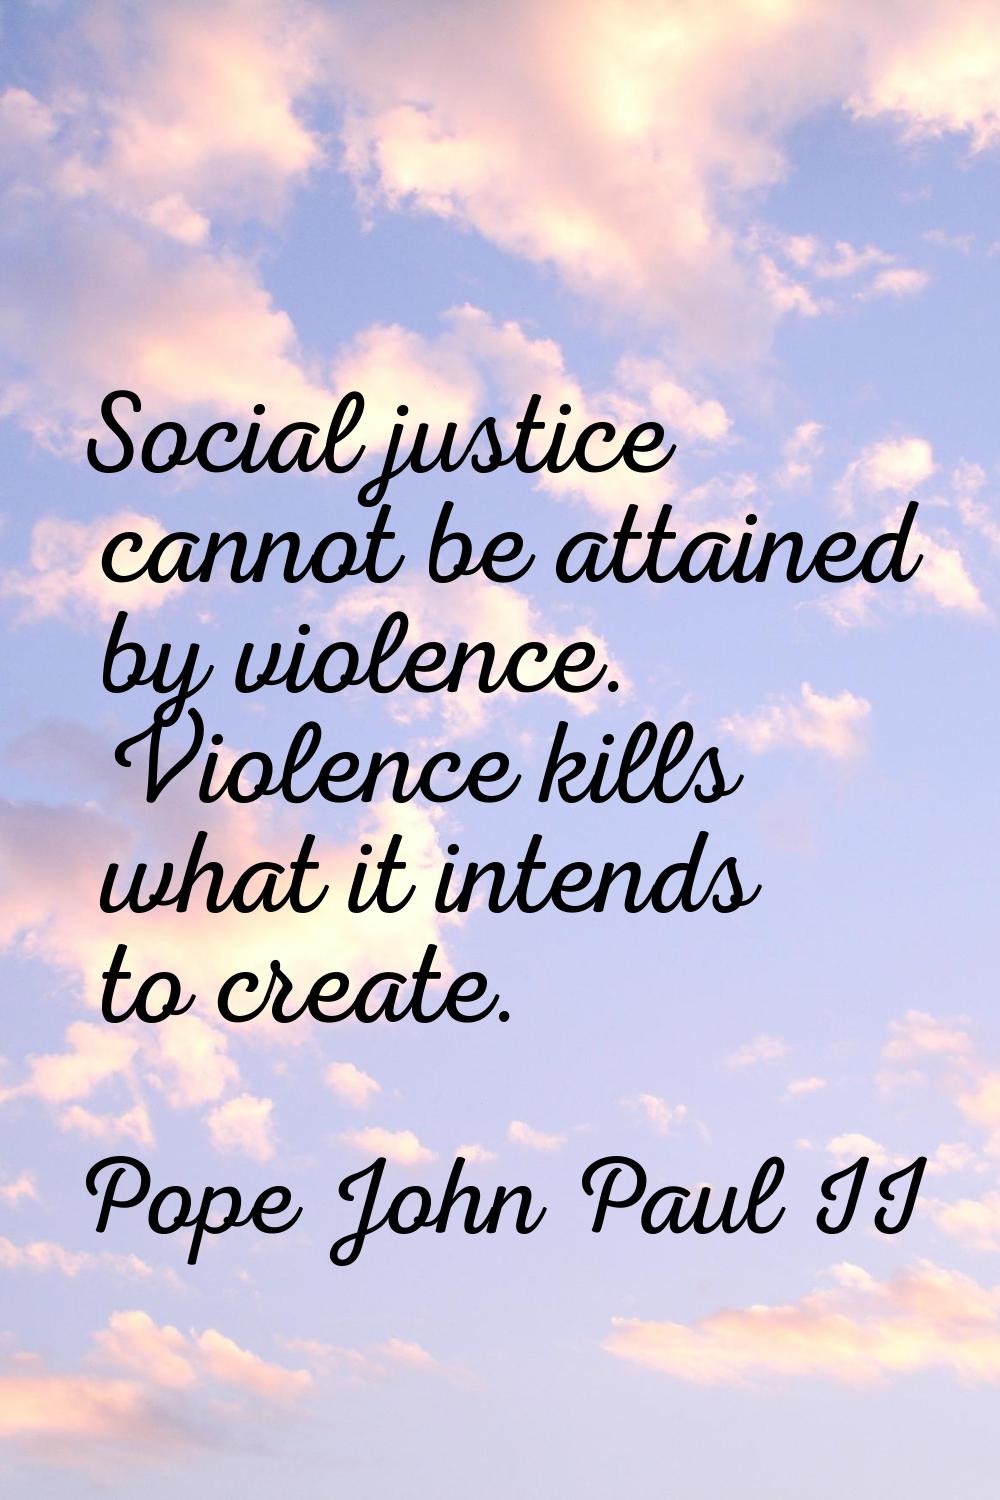 Social justice cannot be attained by violence. Violence kills what it intends to create.